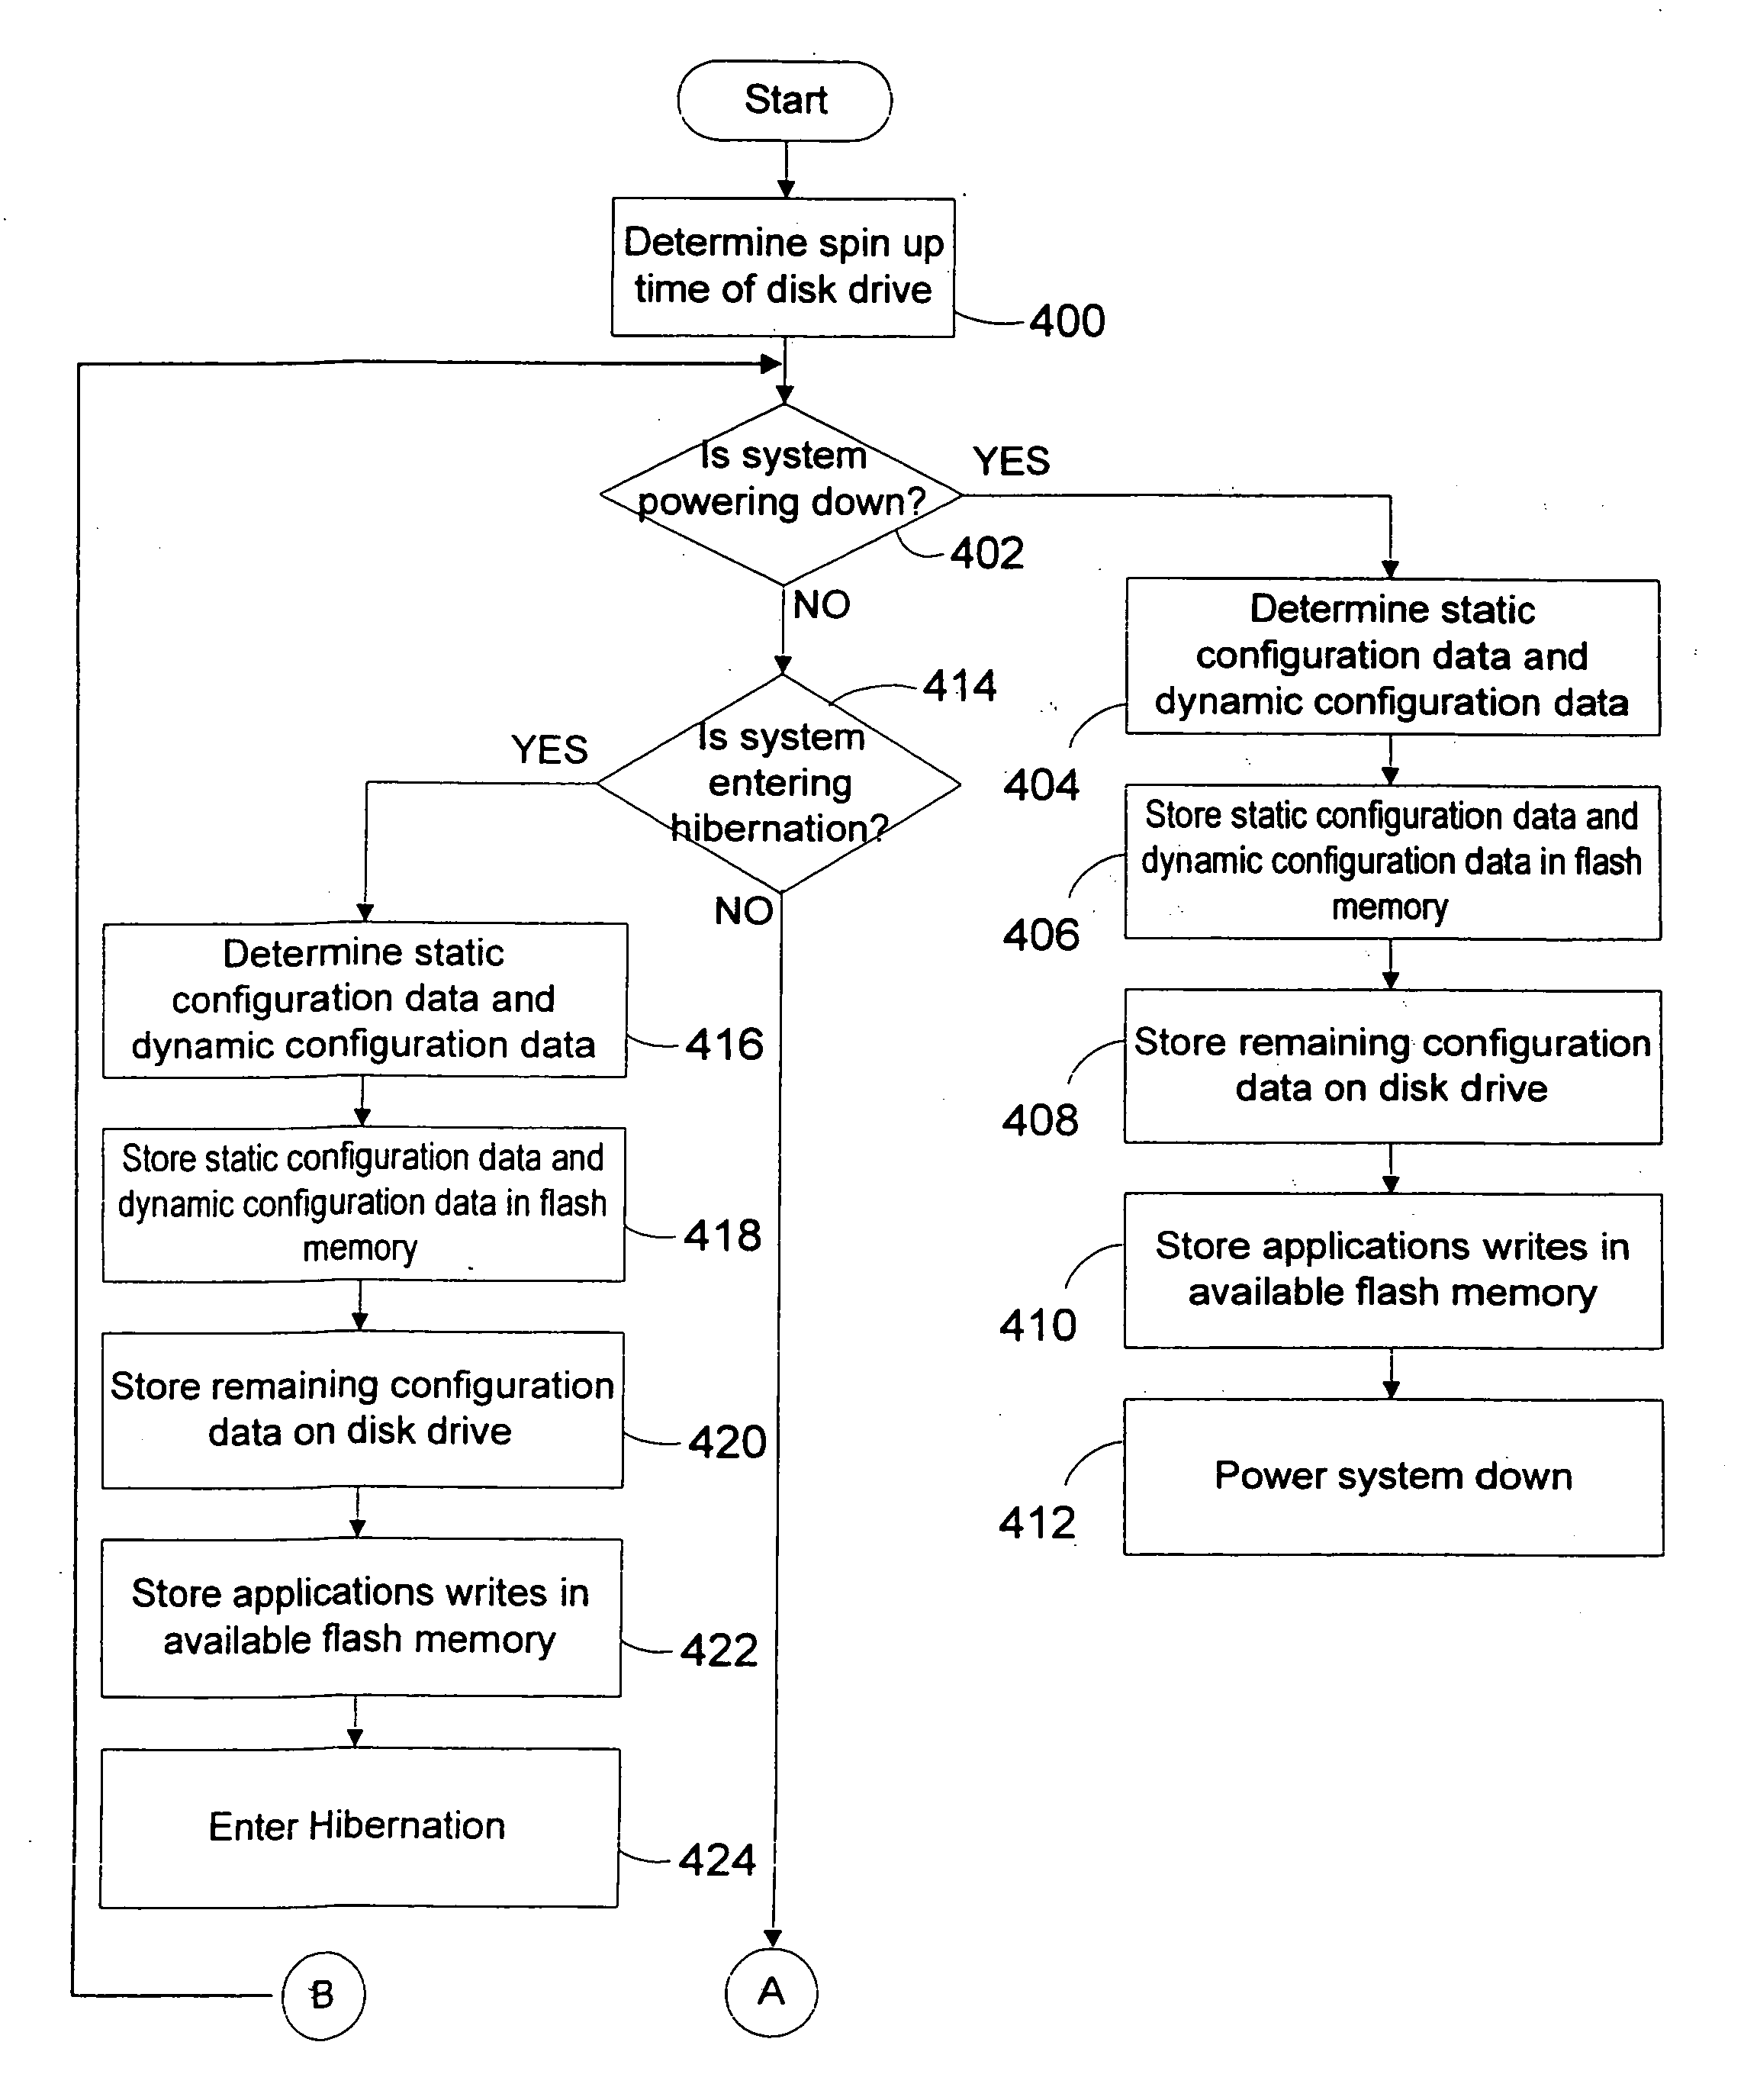 Apparatus and method to decrease boot time and hibernate awaken time of a computer system